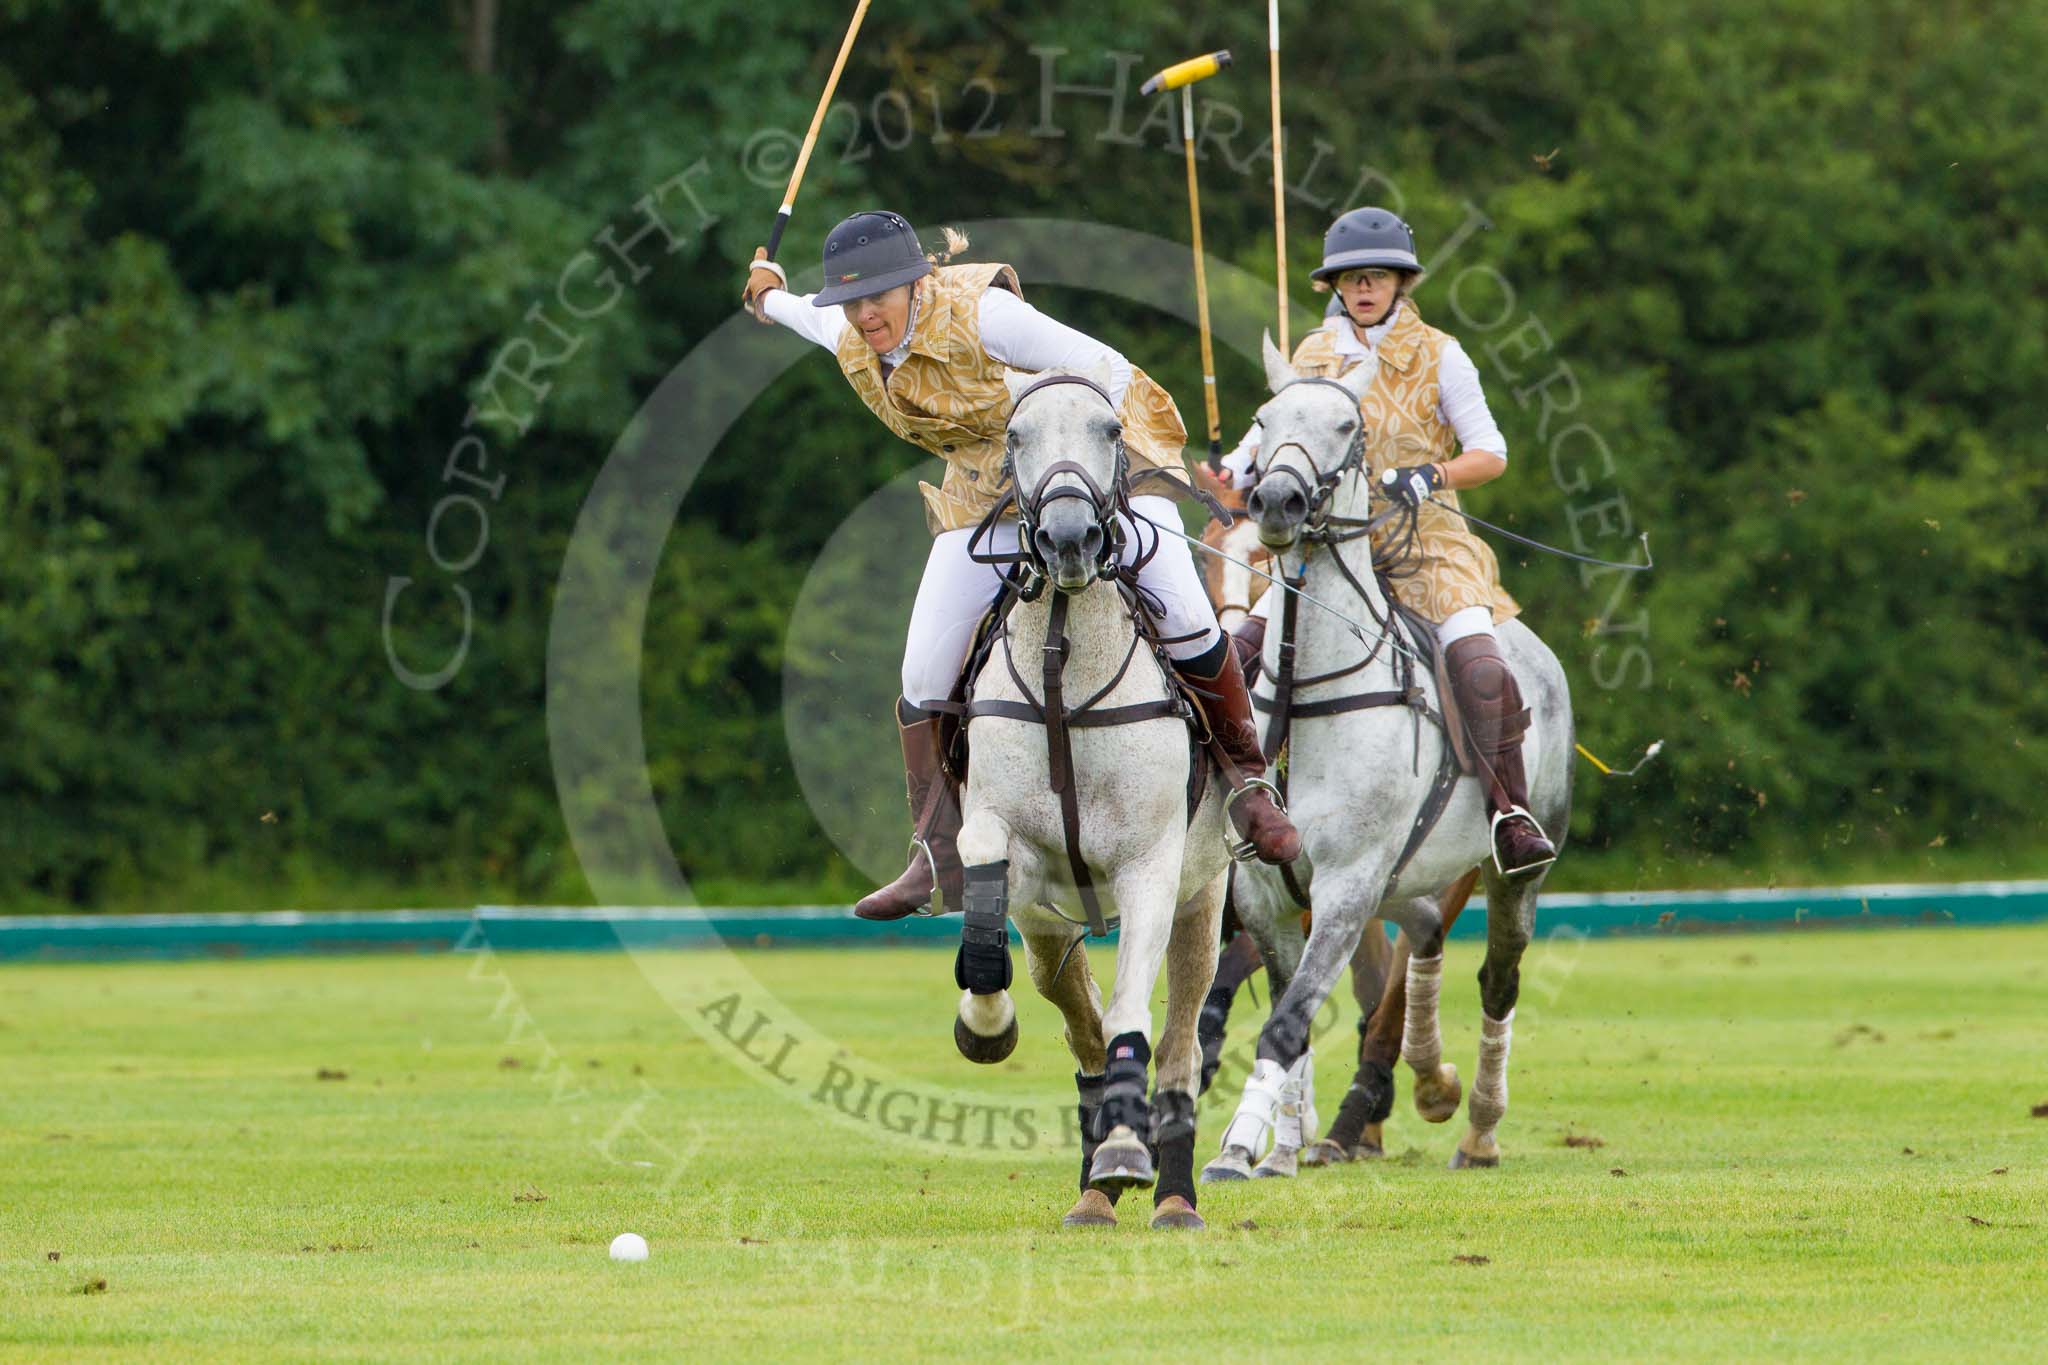 7th Heritage Polo Cup semi-finals: Barbara P Zingg..
Hurtwood Park Polo Club,
Ewhurst Green,
Surrey,
United Kingdom,
on 04 August 2012 at 13:14, image #114